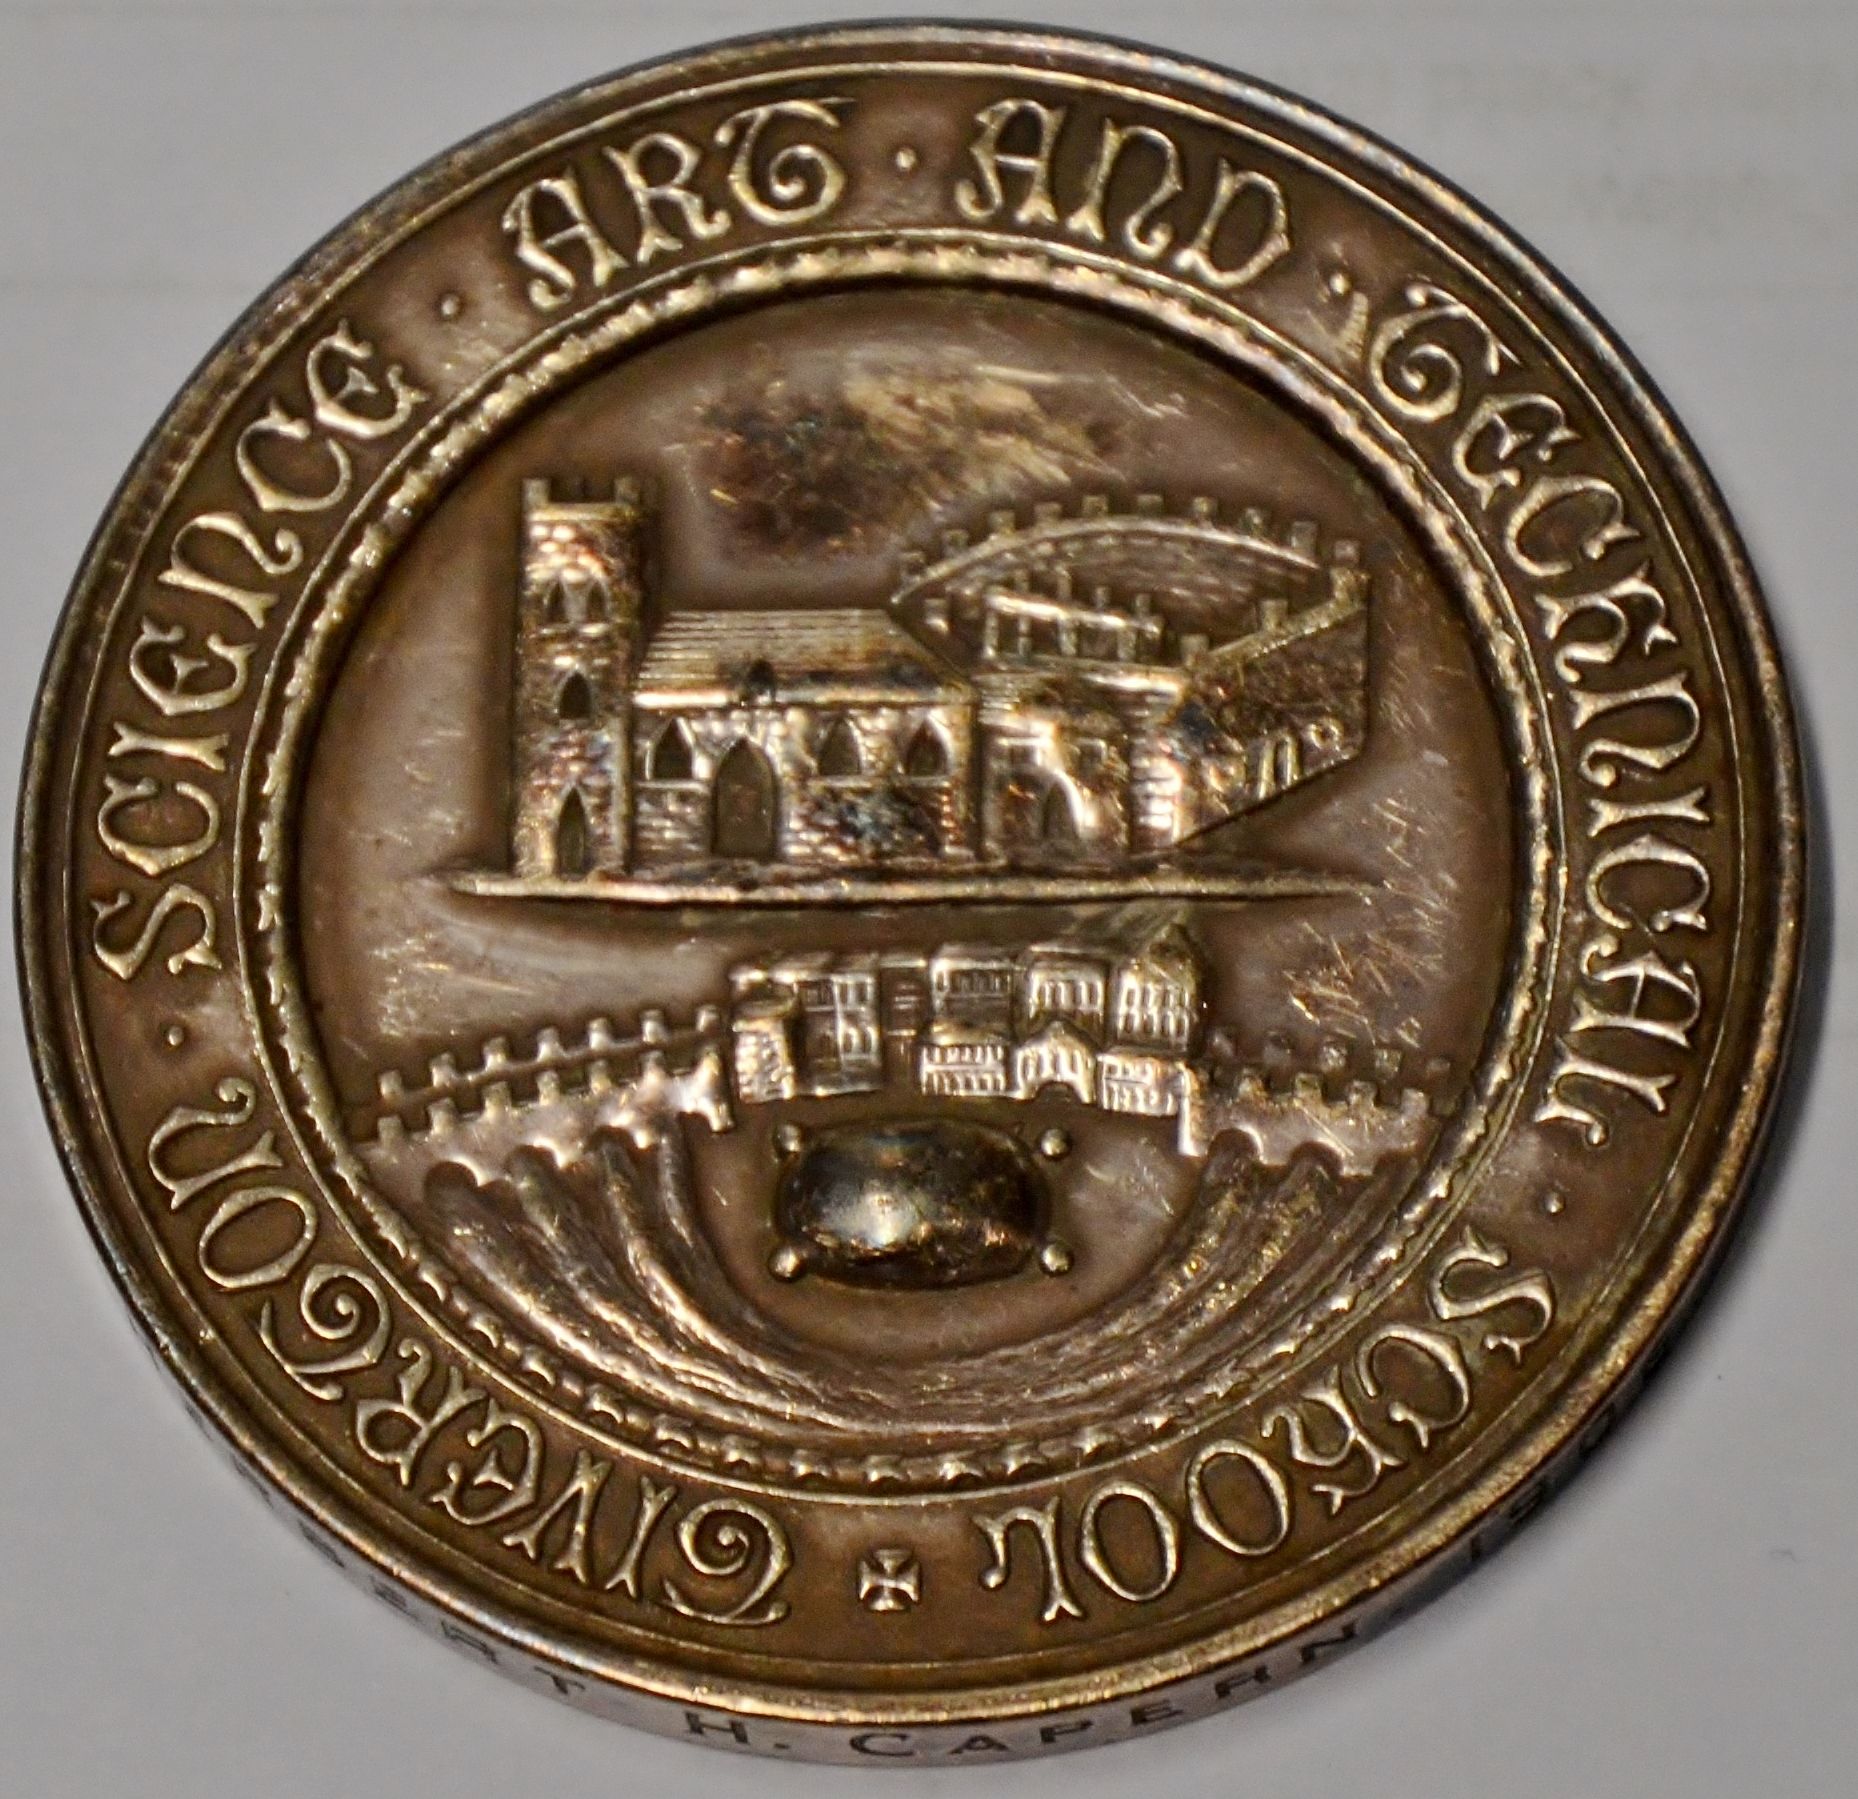 The Hadow medal showing the name of the school and a depiction of Tiverton